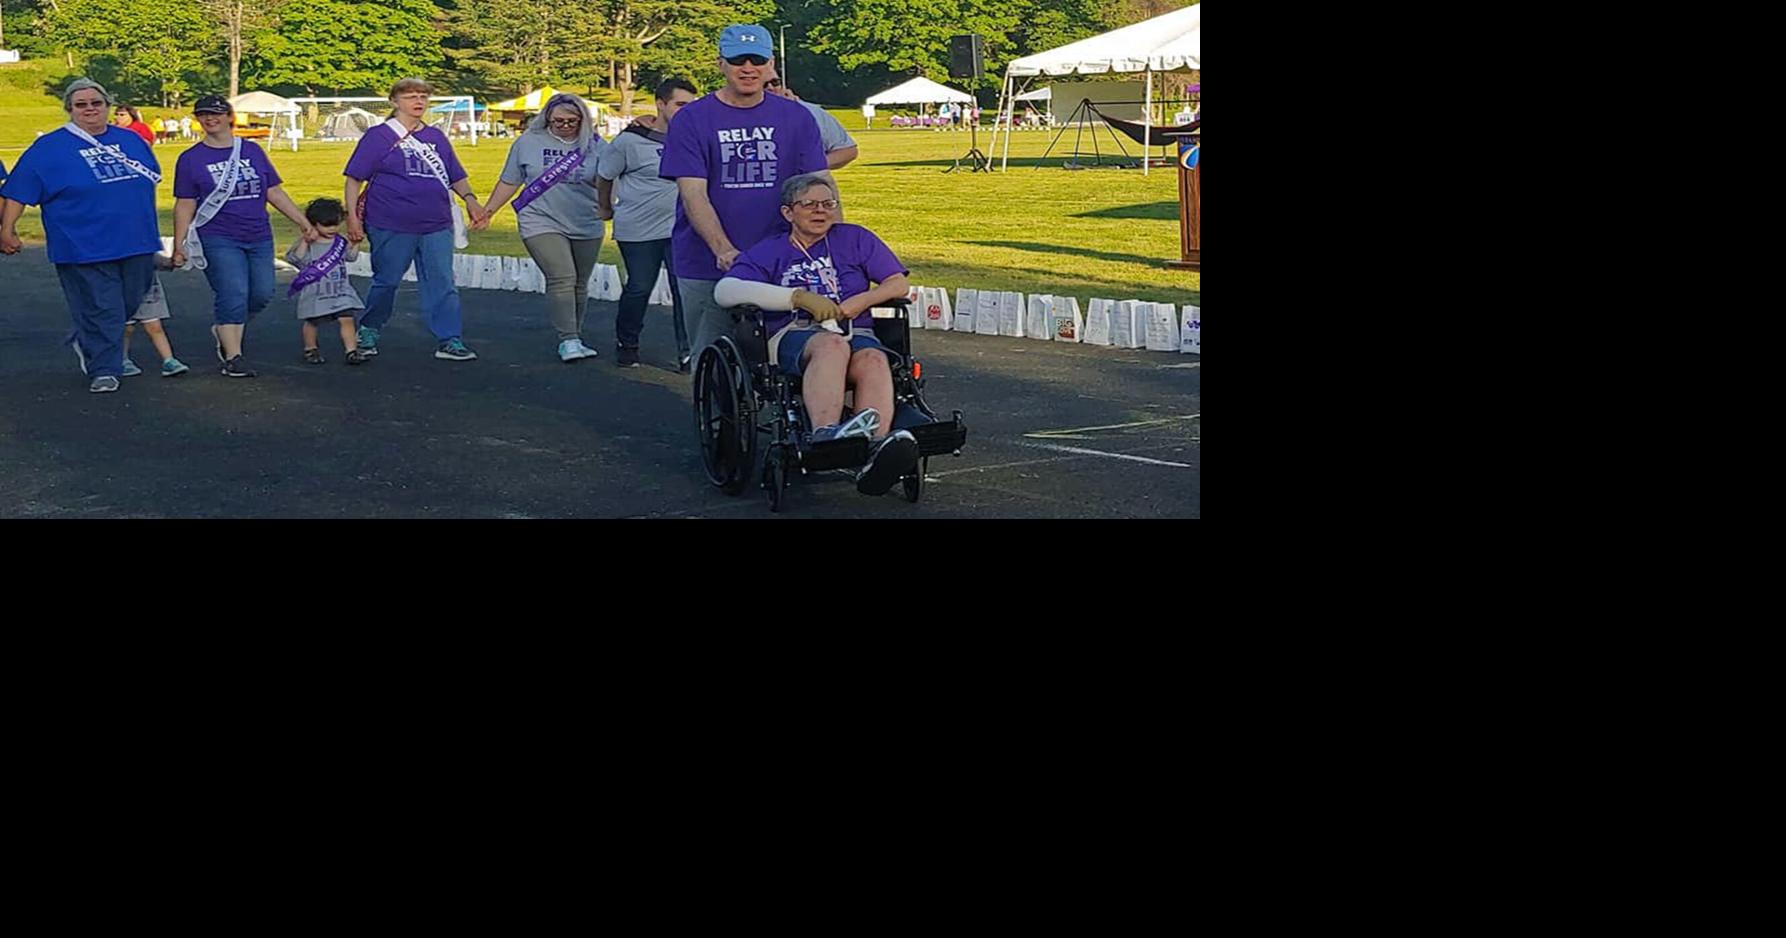 The end of an era: Final 24-hour Relay for Life of Greater Haverhill ...